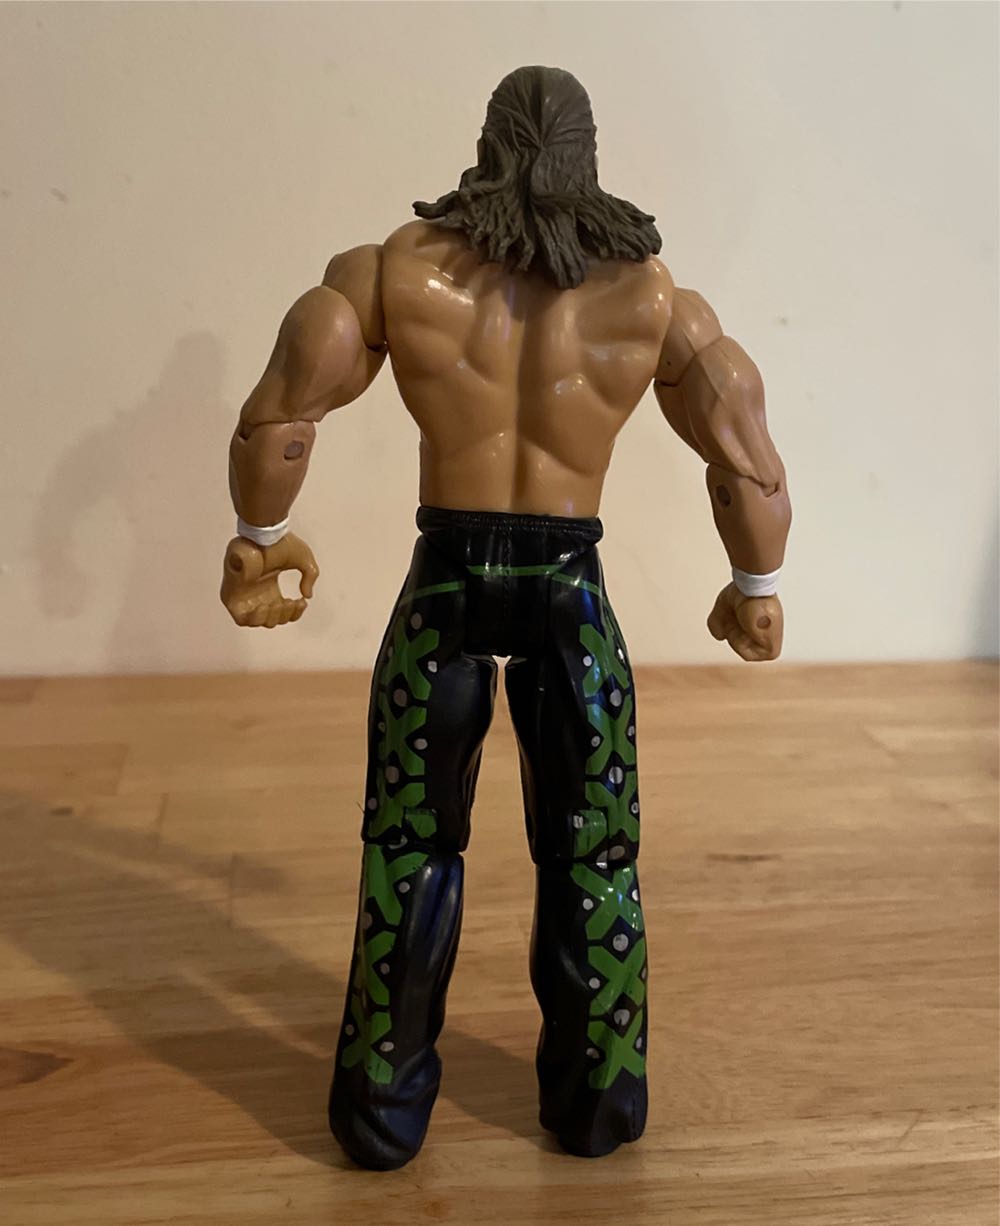 Shawn Michaels - WWE Jakks Pacific Ruthless Aggression Series (WWE Jakks Pacific Ruthless Aggression Series Custom) action figure collectible - Main Image 2